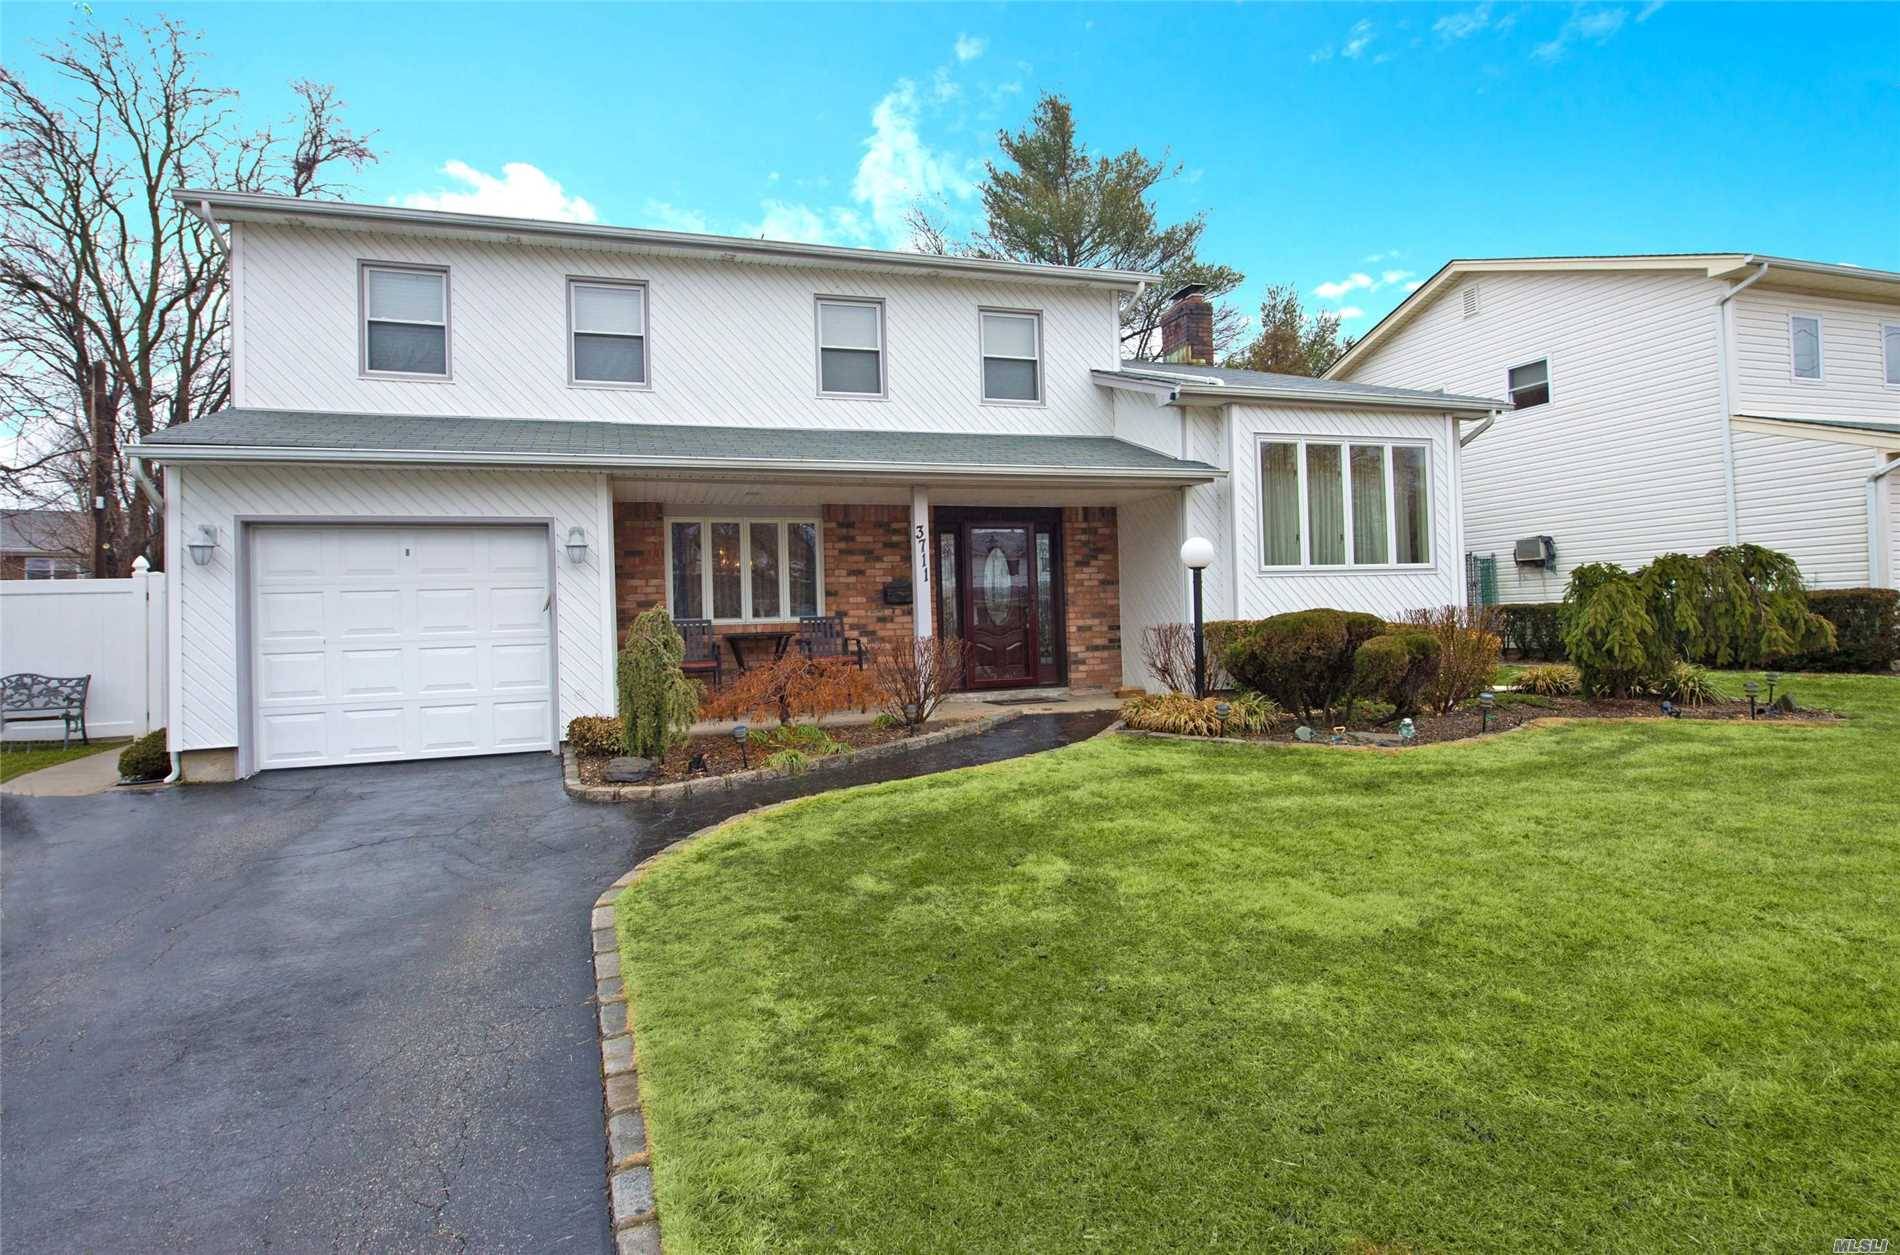 Nothing Like It - This Beautiful Customized Colonial Boasts A Renovated Designer Kitchen (Custom Cabinetry And High End Appliances) And Baths.